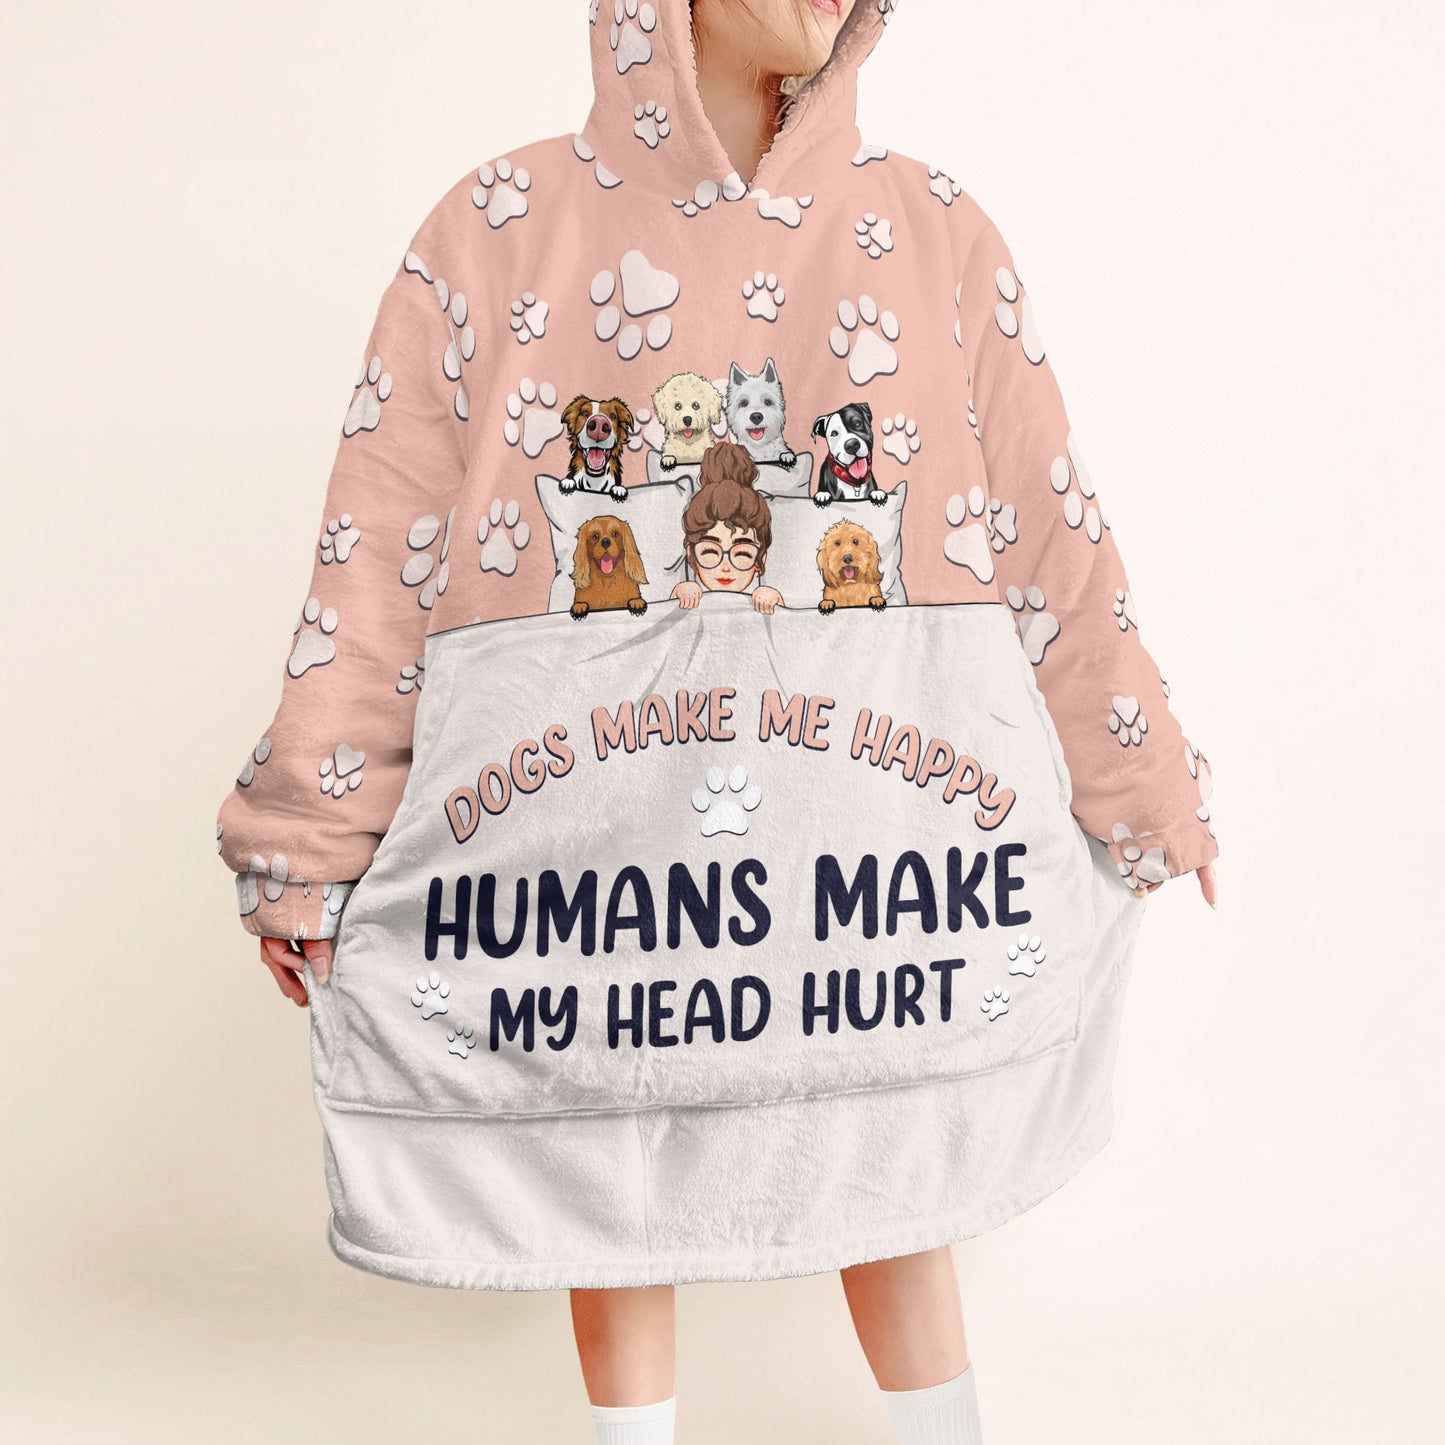 Dogs Make Me Happy, Humans Make My Head Hurt - Personalized Oversized Blanket Hoodie